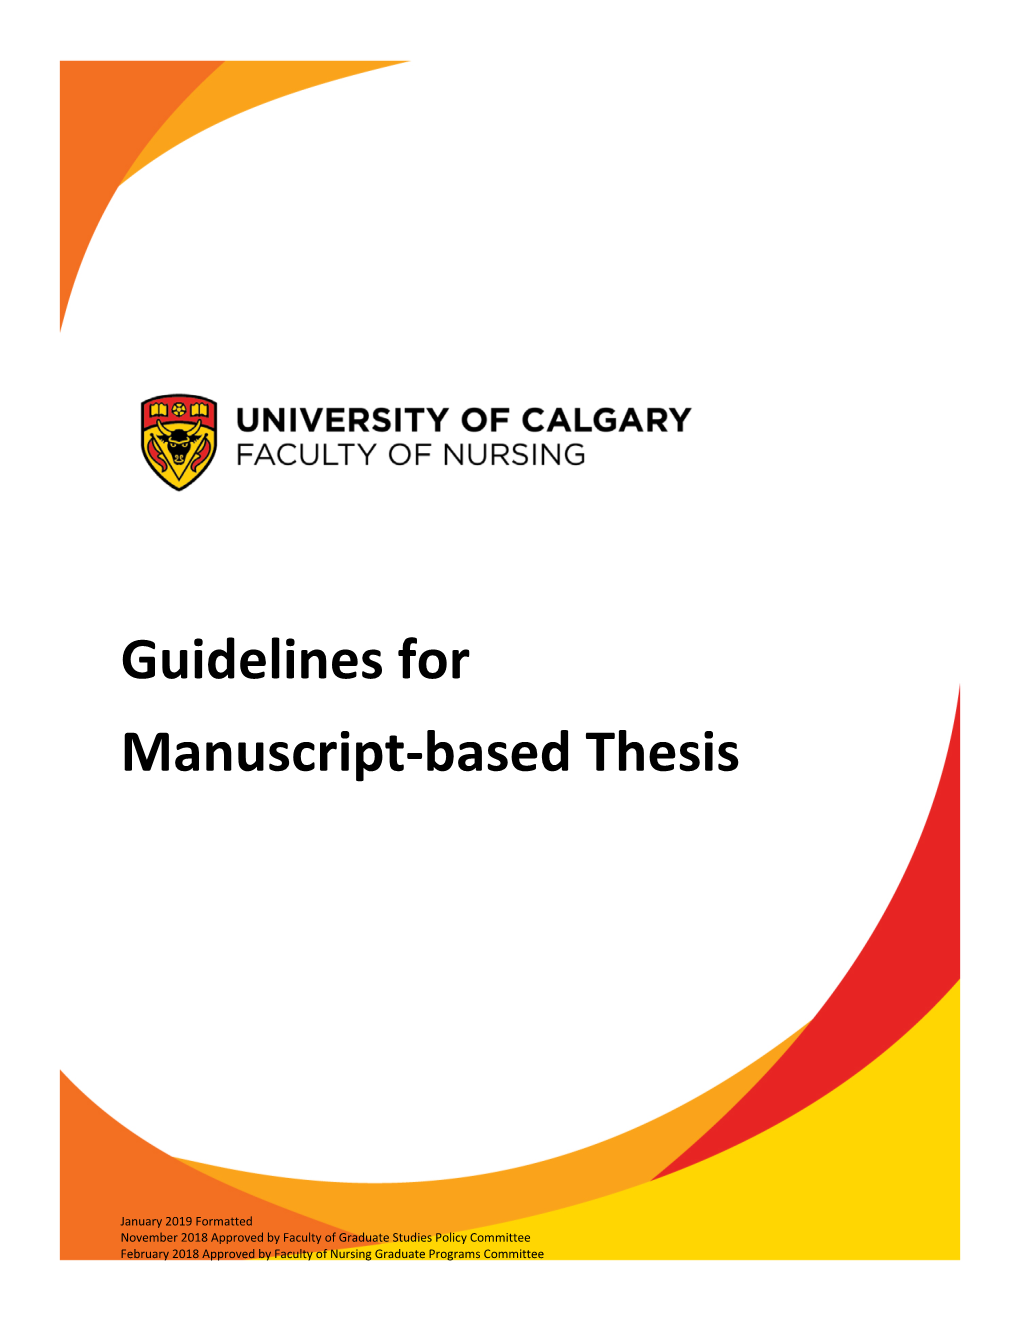 Guidelines for Manuscript-Based Thesis